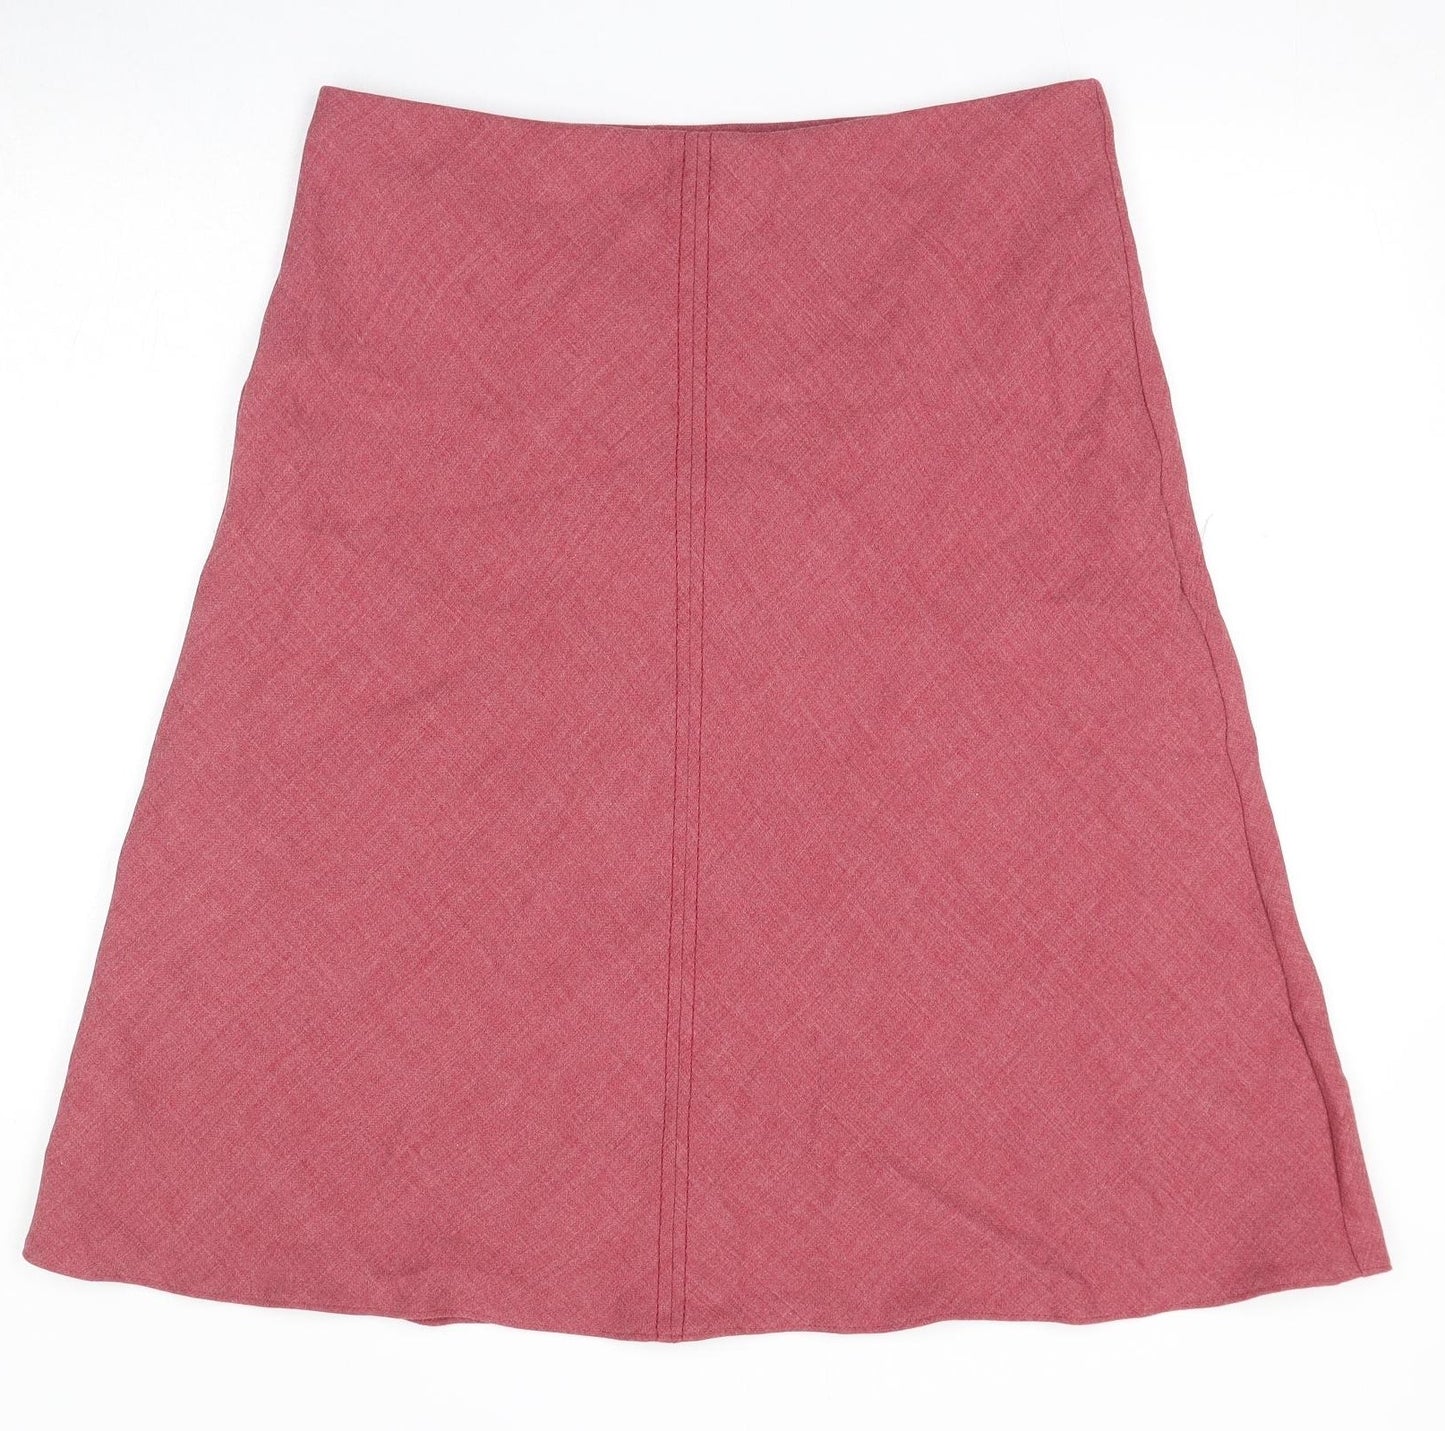 Marks and Spencer Womens Pink Wool A-Line Skirt Size 16